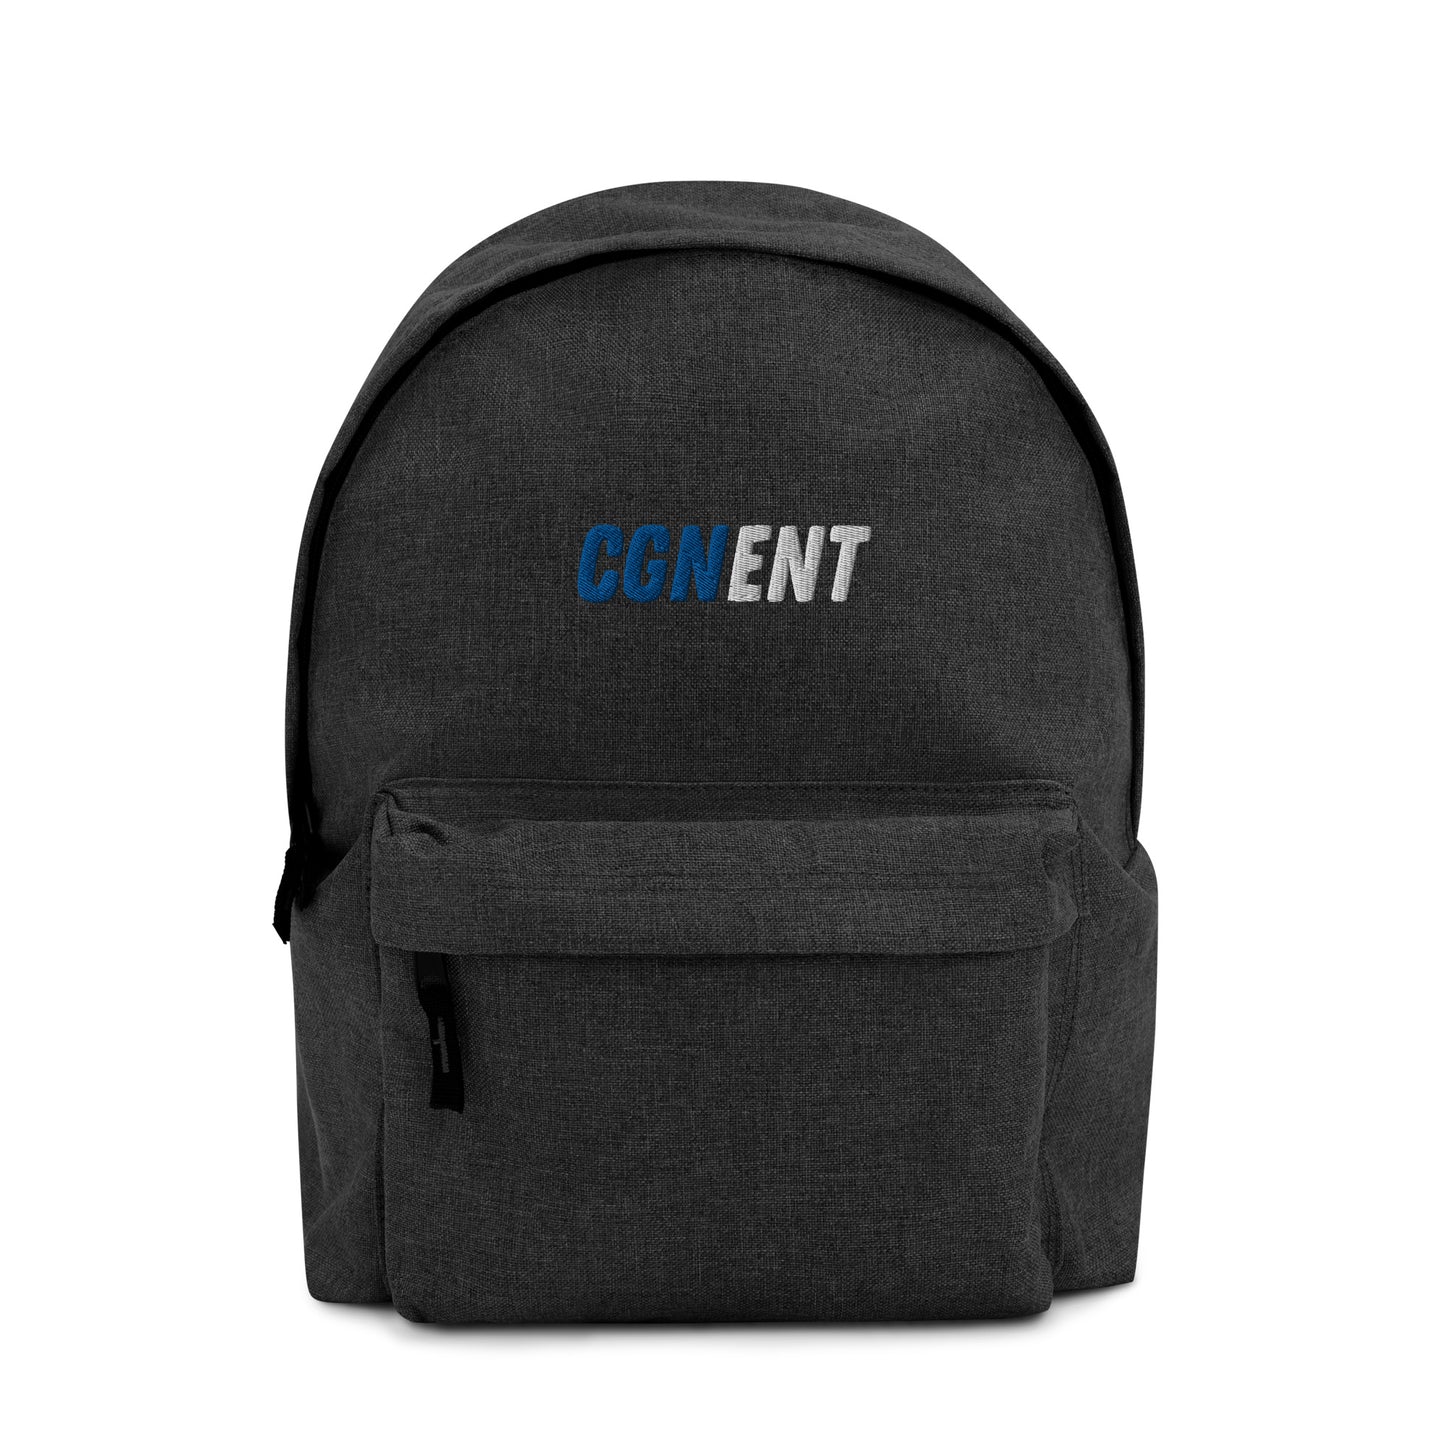 CGNENT Embroidered Backpack